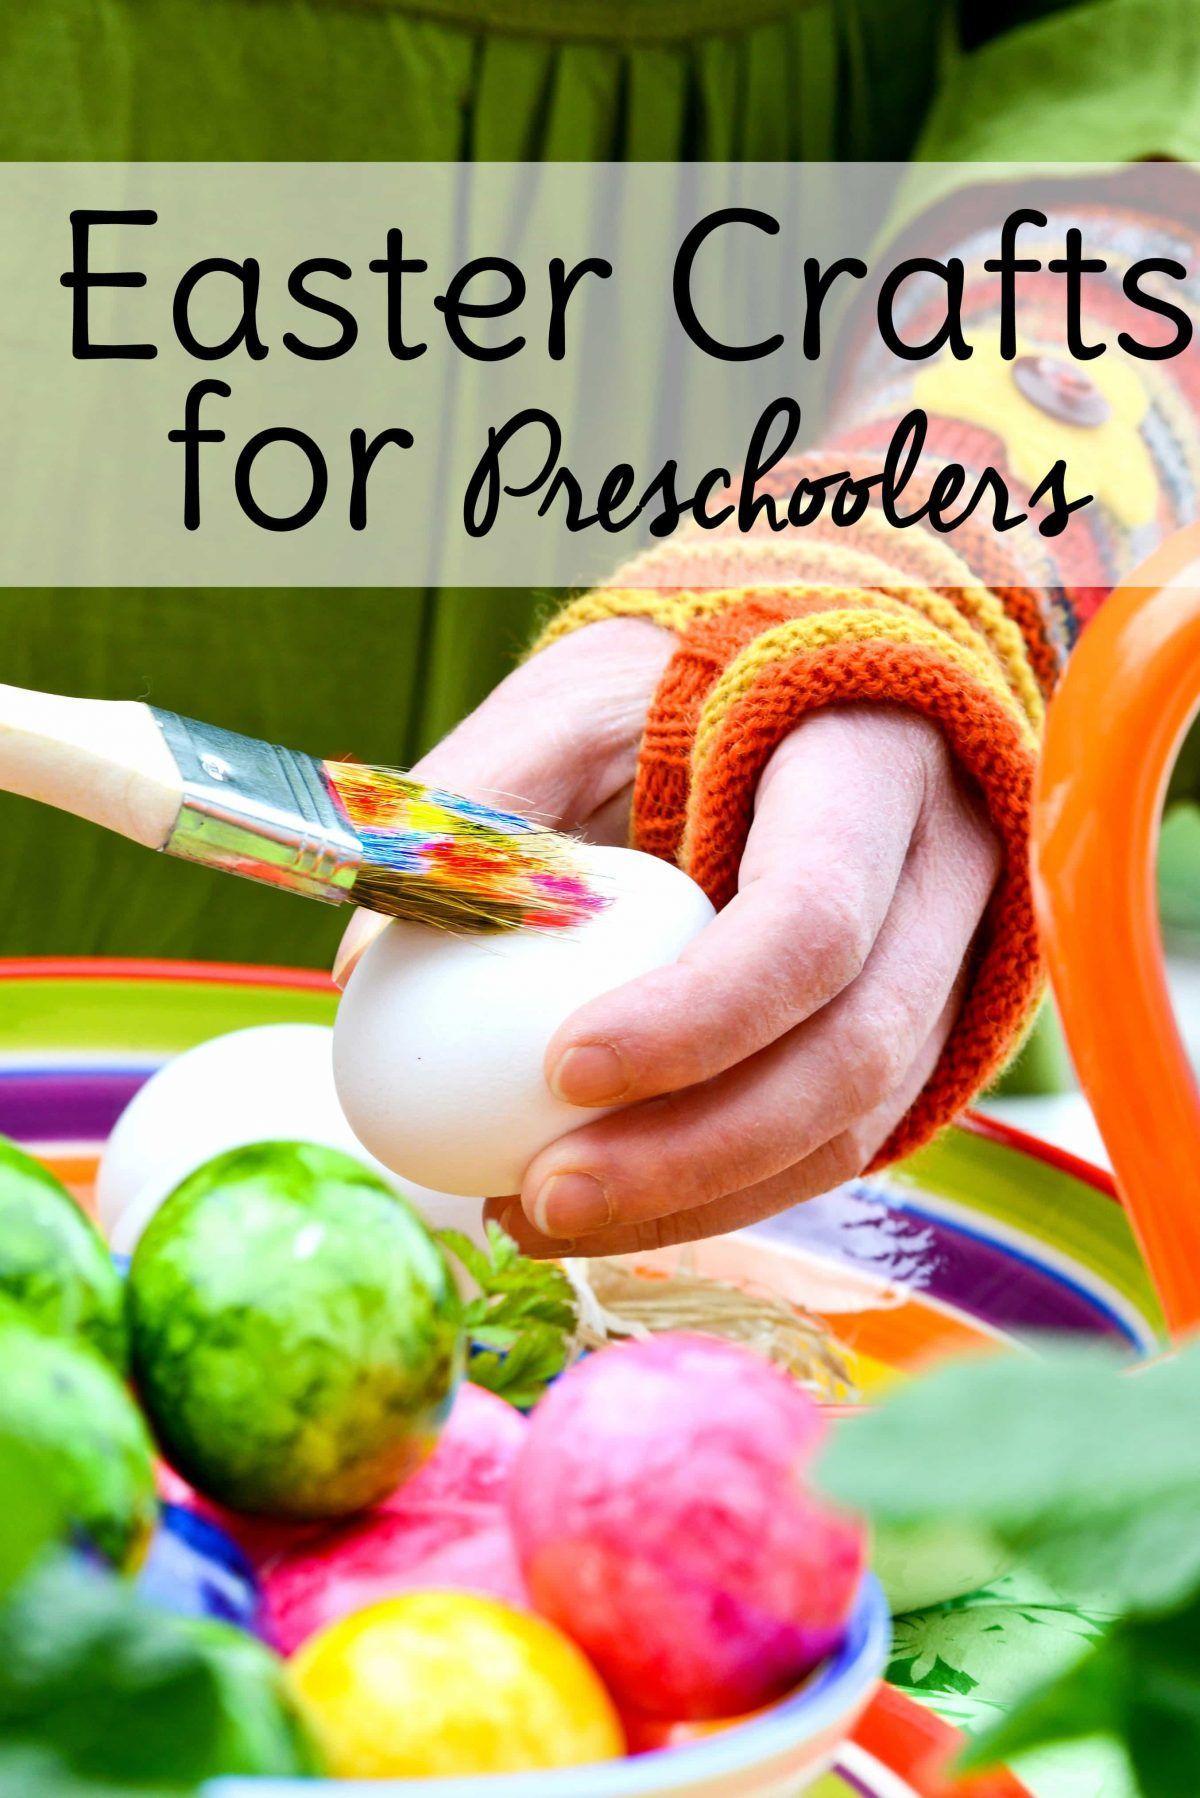 Religious Easter Crafts for Kids: Make a Resurrection Garden and More! -   16 christian nature crafts
 ideas